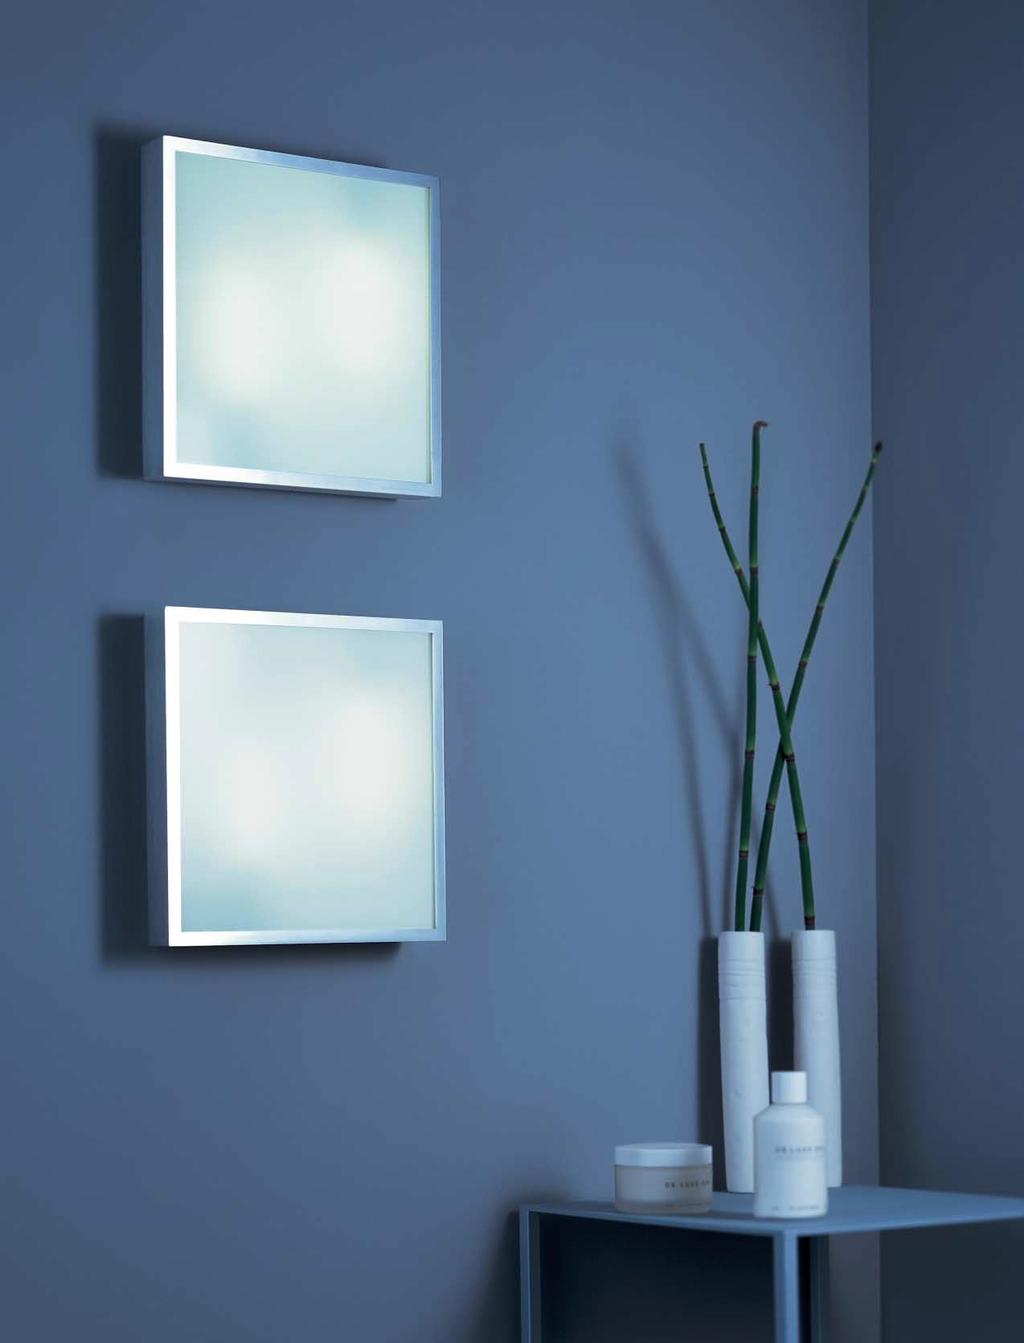 Styling bathrooms with light rredare il bagno con la luce oncebir el cuarto de baño con luz Whether individually or in combinations, solitary lights step into the role of design elements and give